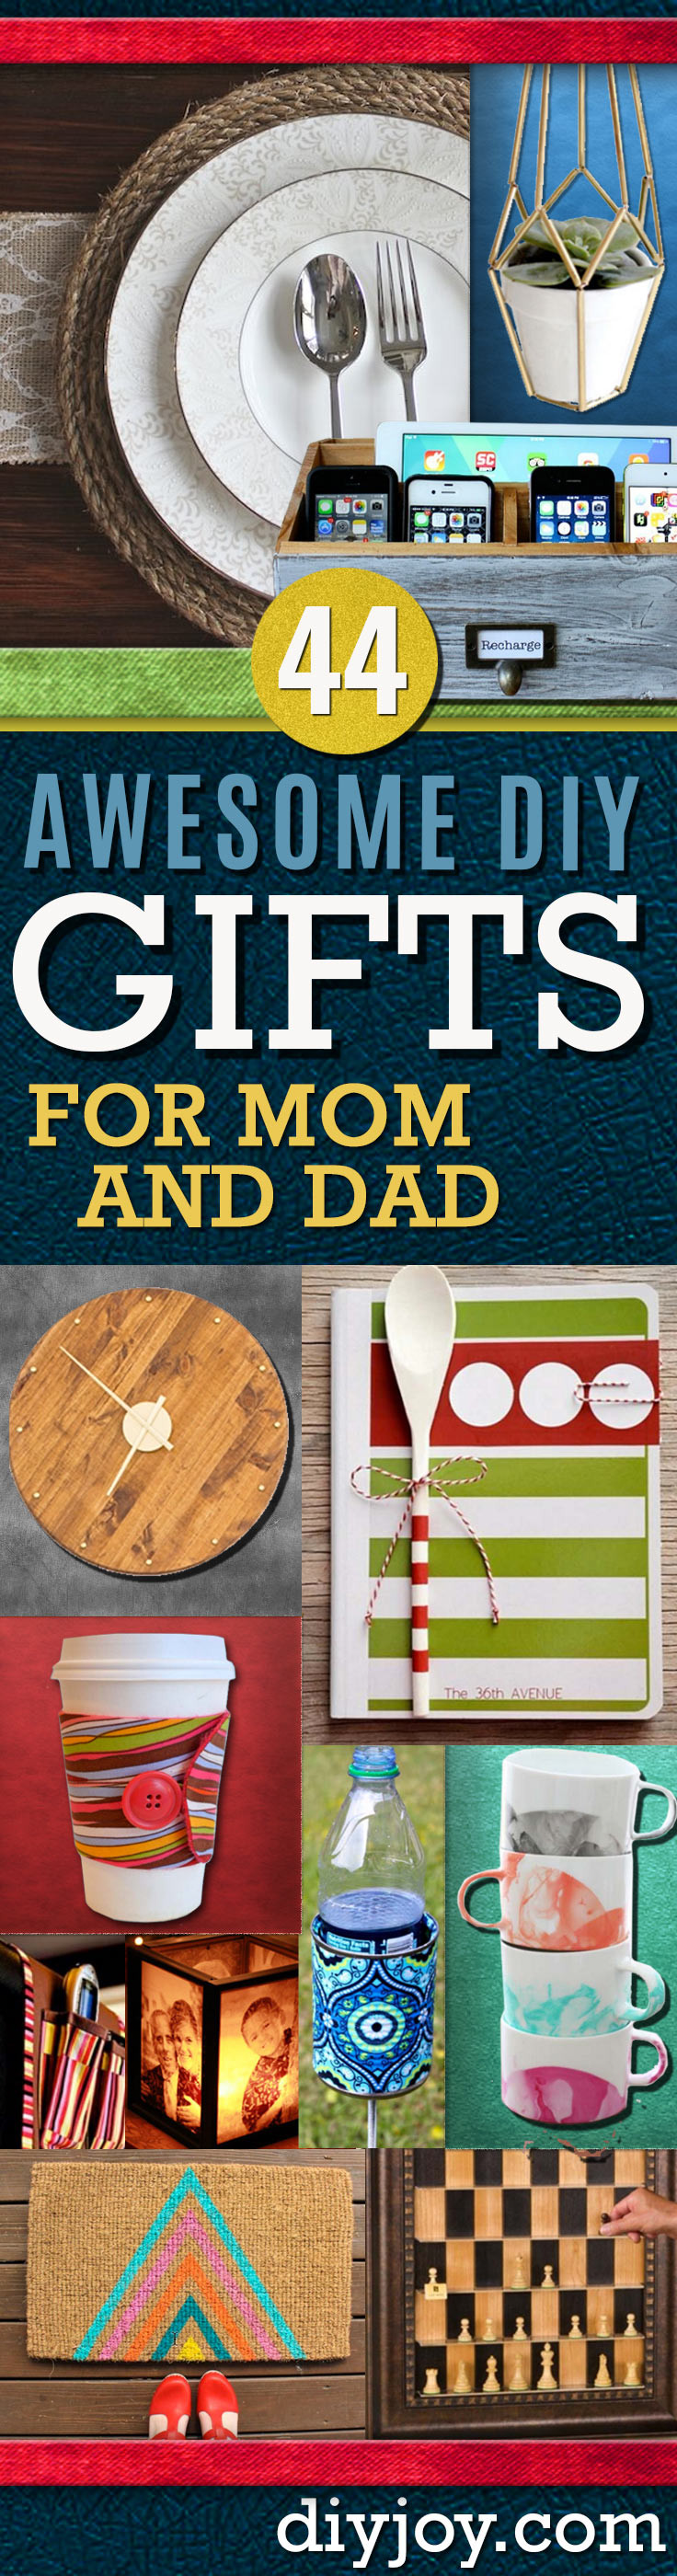 DIY Christmas Gift For Dad
 Awesome DIY Gift Ideas Mom and Dad Will Love